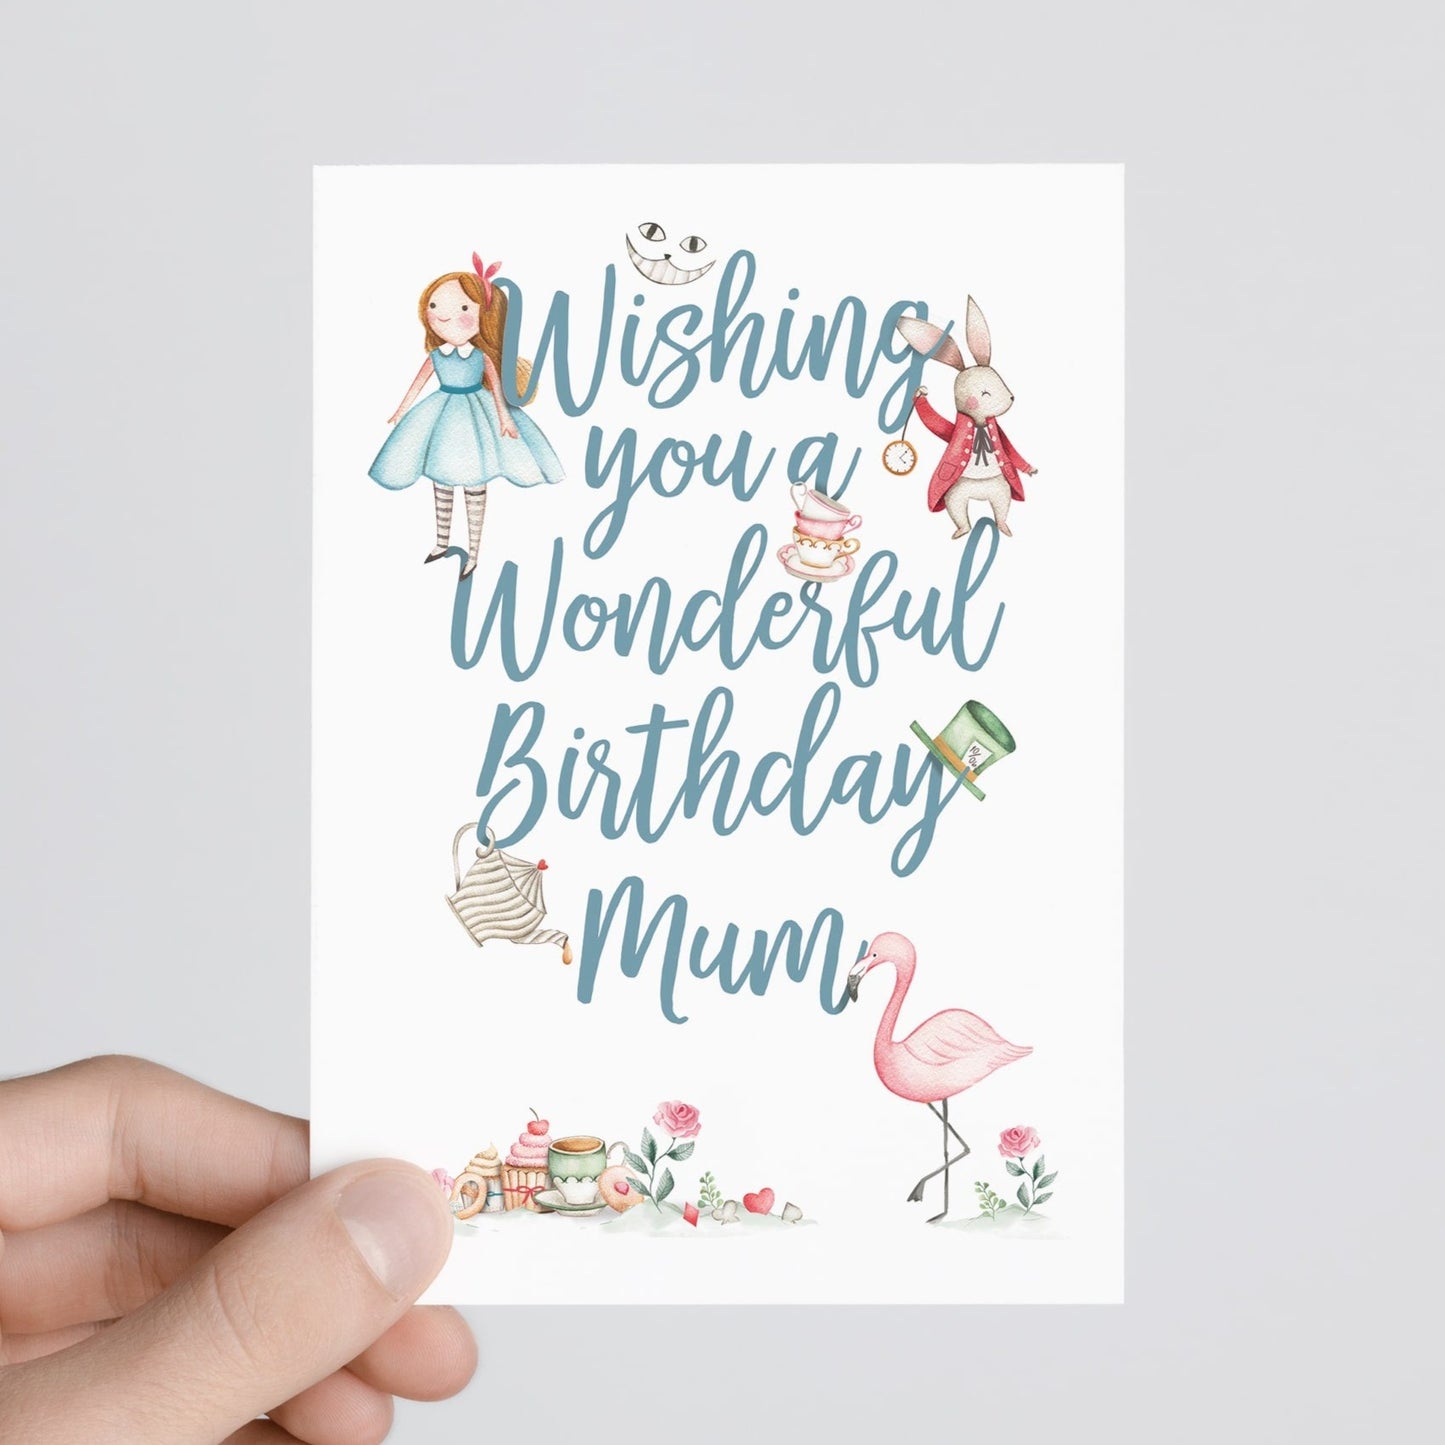 person holding Alice in wonderland personalised birthday card 